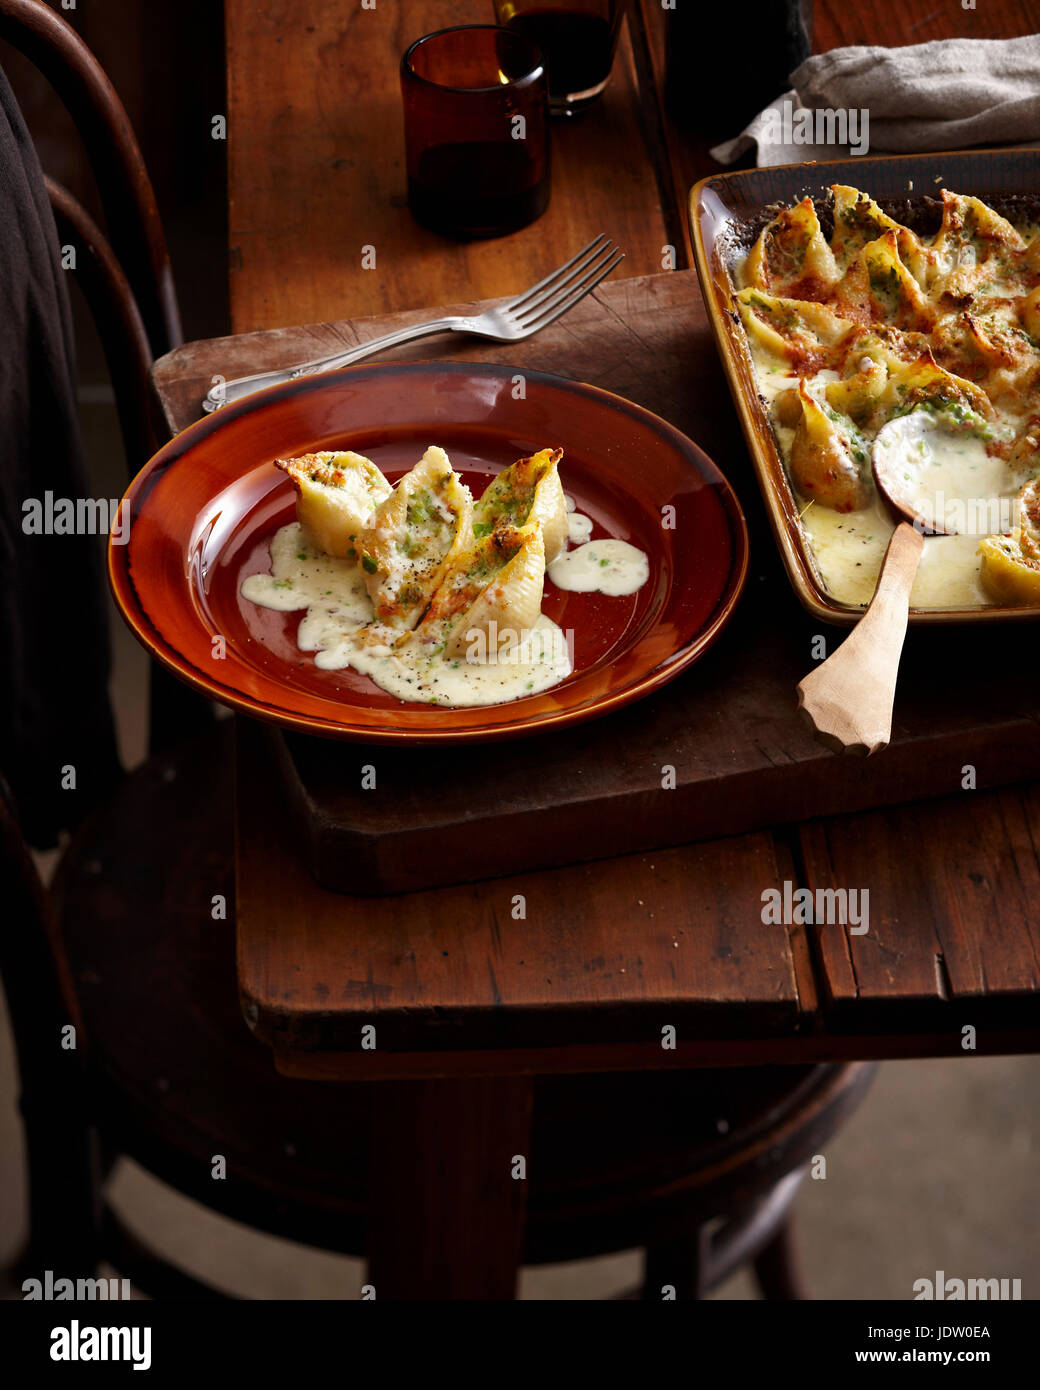 Plate of stuffed fruit with cream sauce Stock Photo